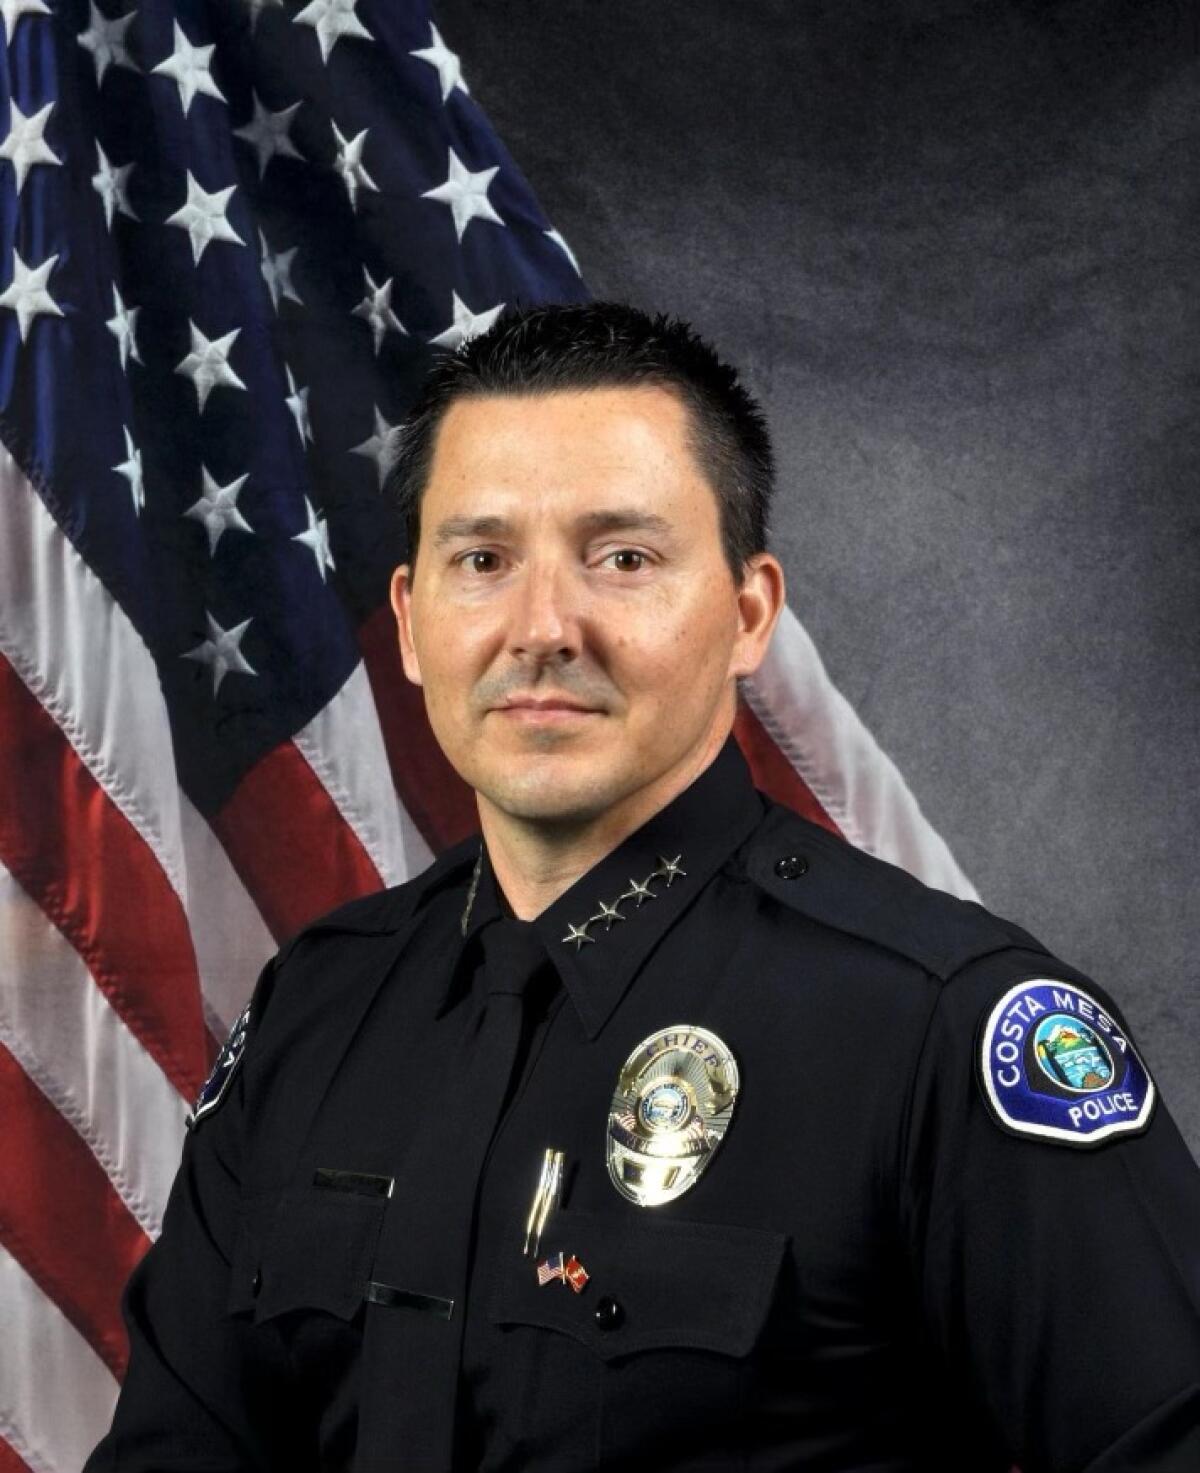 Costa Mesa Police Chief Bryan Glass announced Wednesday he will retire in September after 26 years with the department.